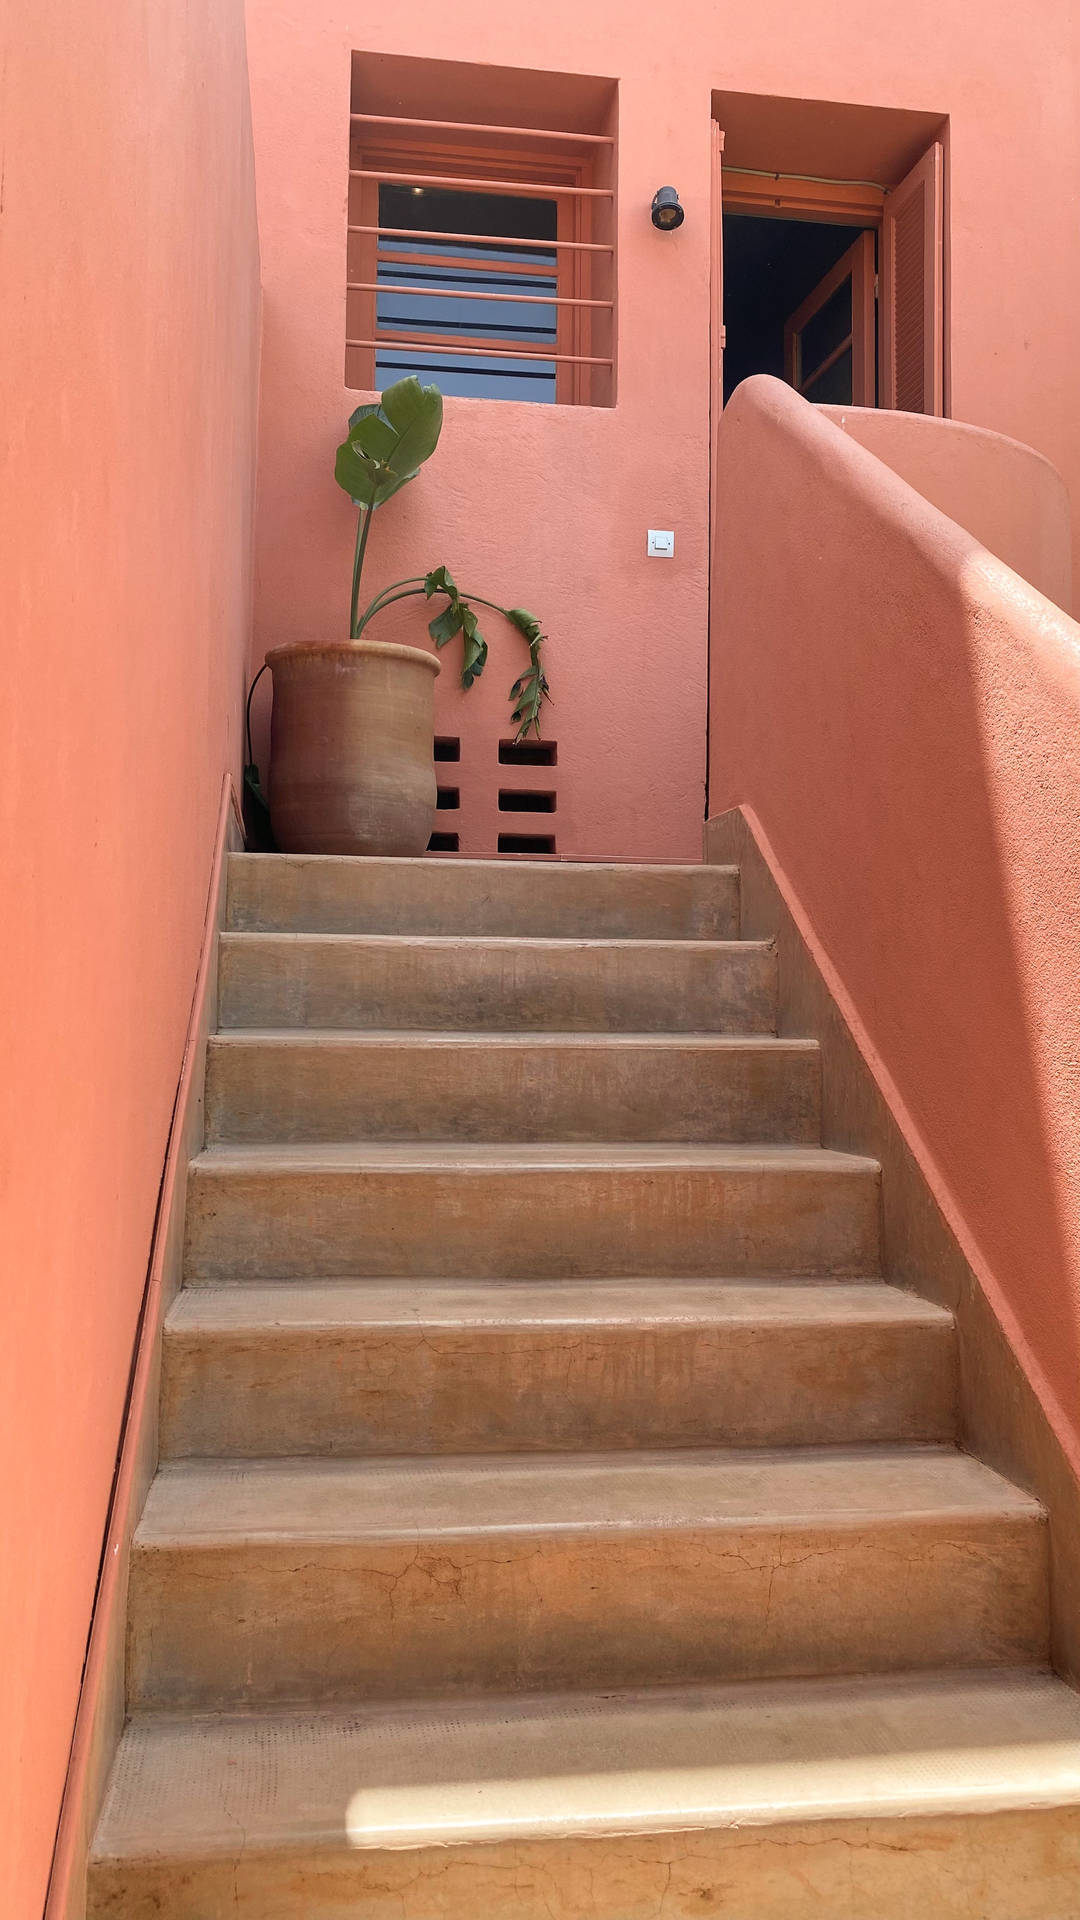 Stairway Potted Plant Aesthetic Background